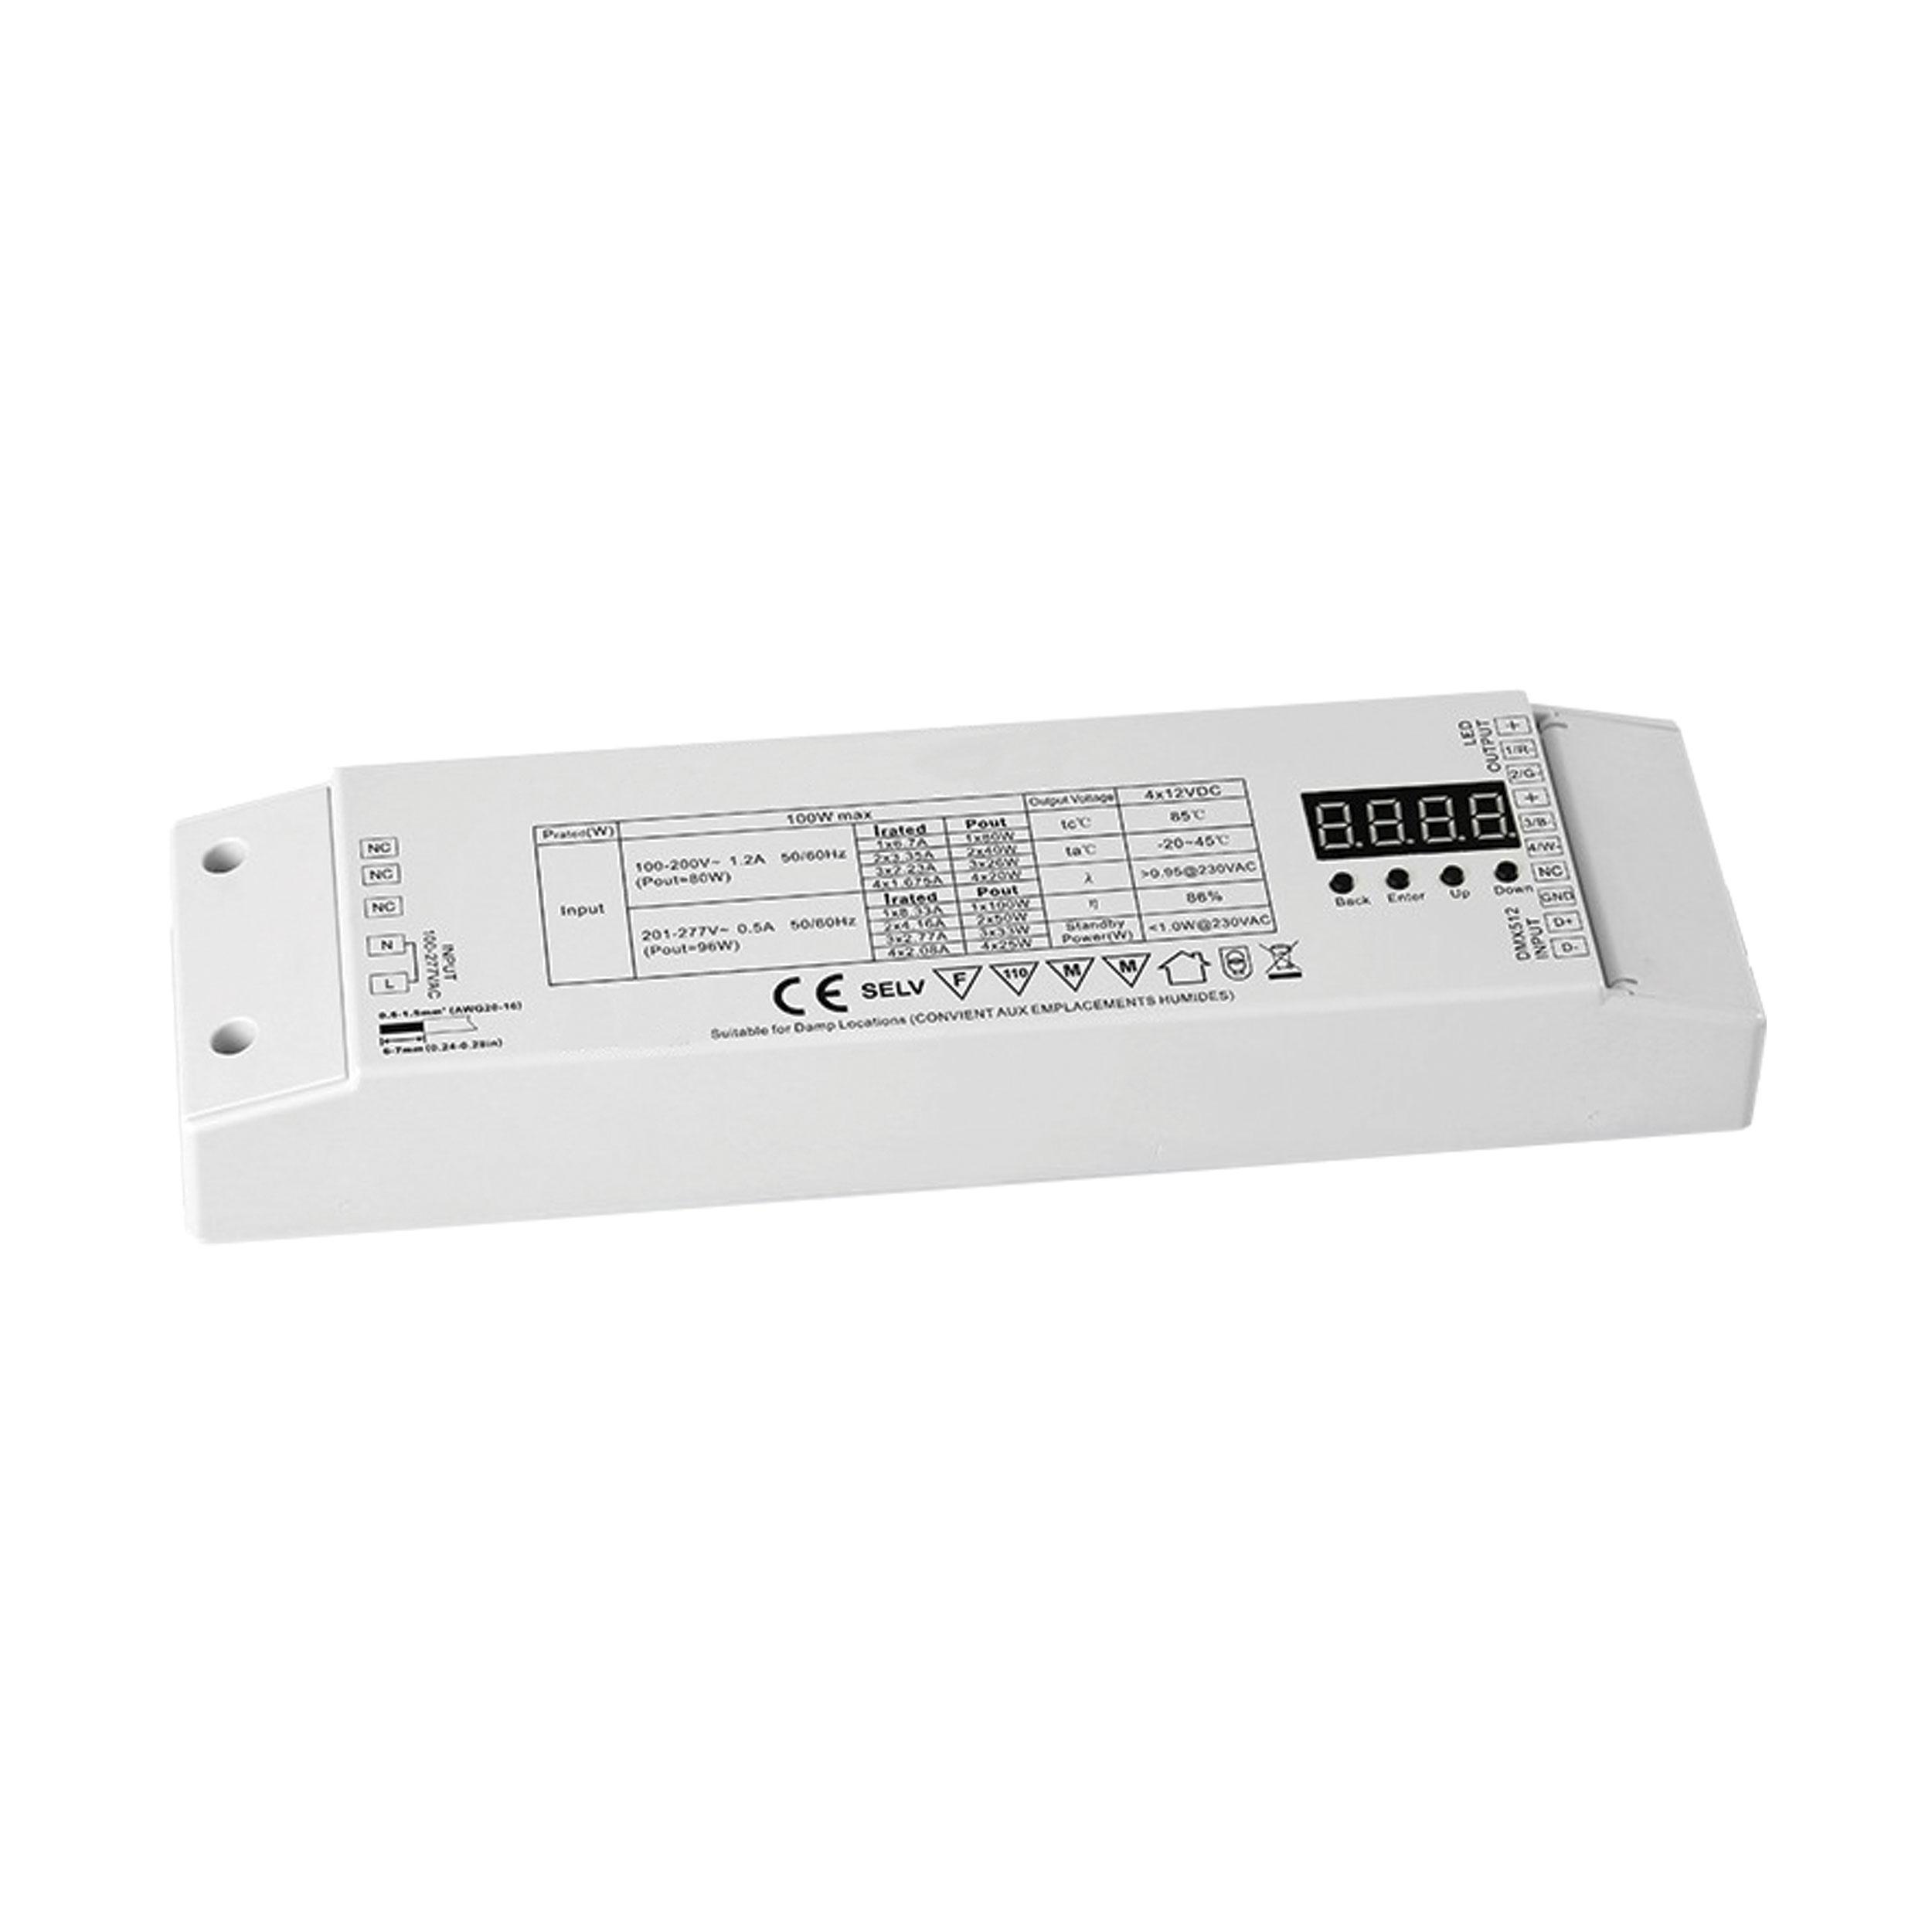 DMX Decoder with Built-in LED Driver